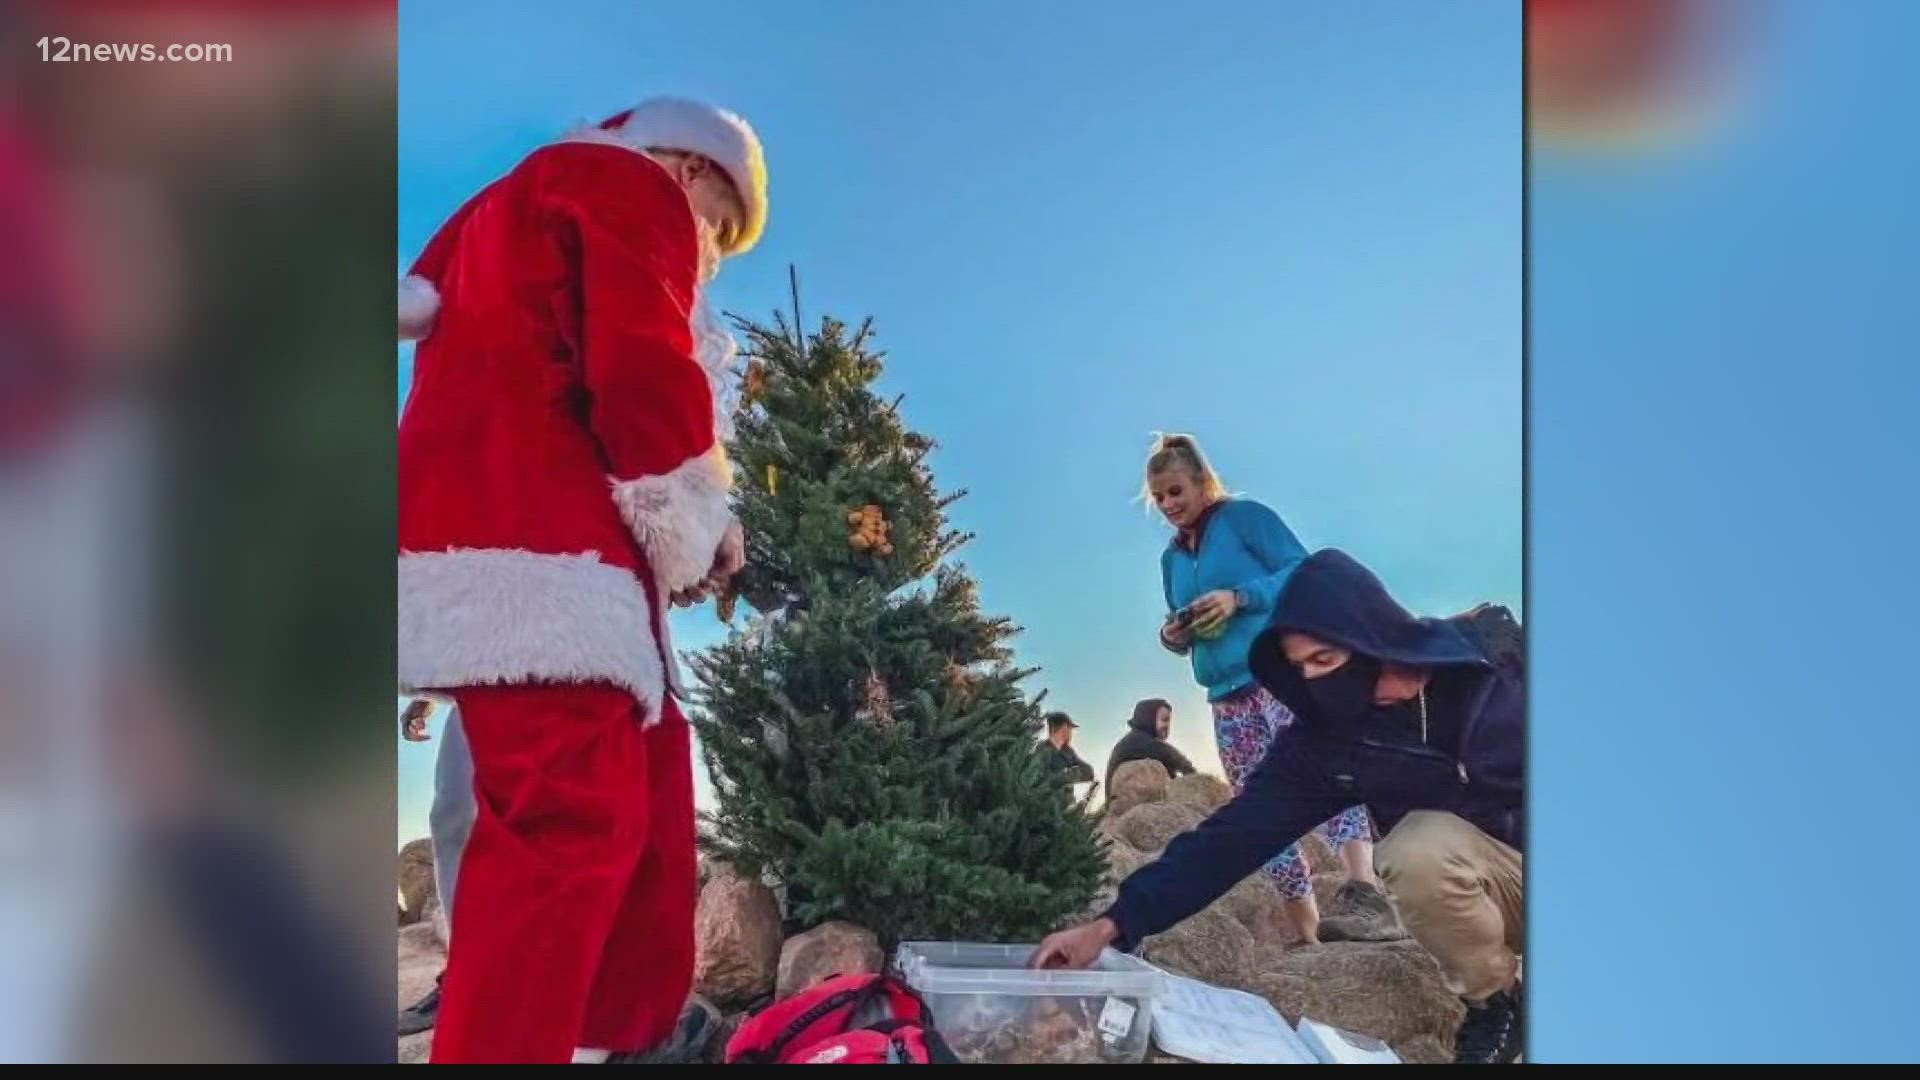 A Valley man makes his annual trek up Camelback Mountain to plant a christmas tree at the top in honor of first responders. Santa has made the hike since 2013.